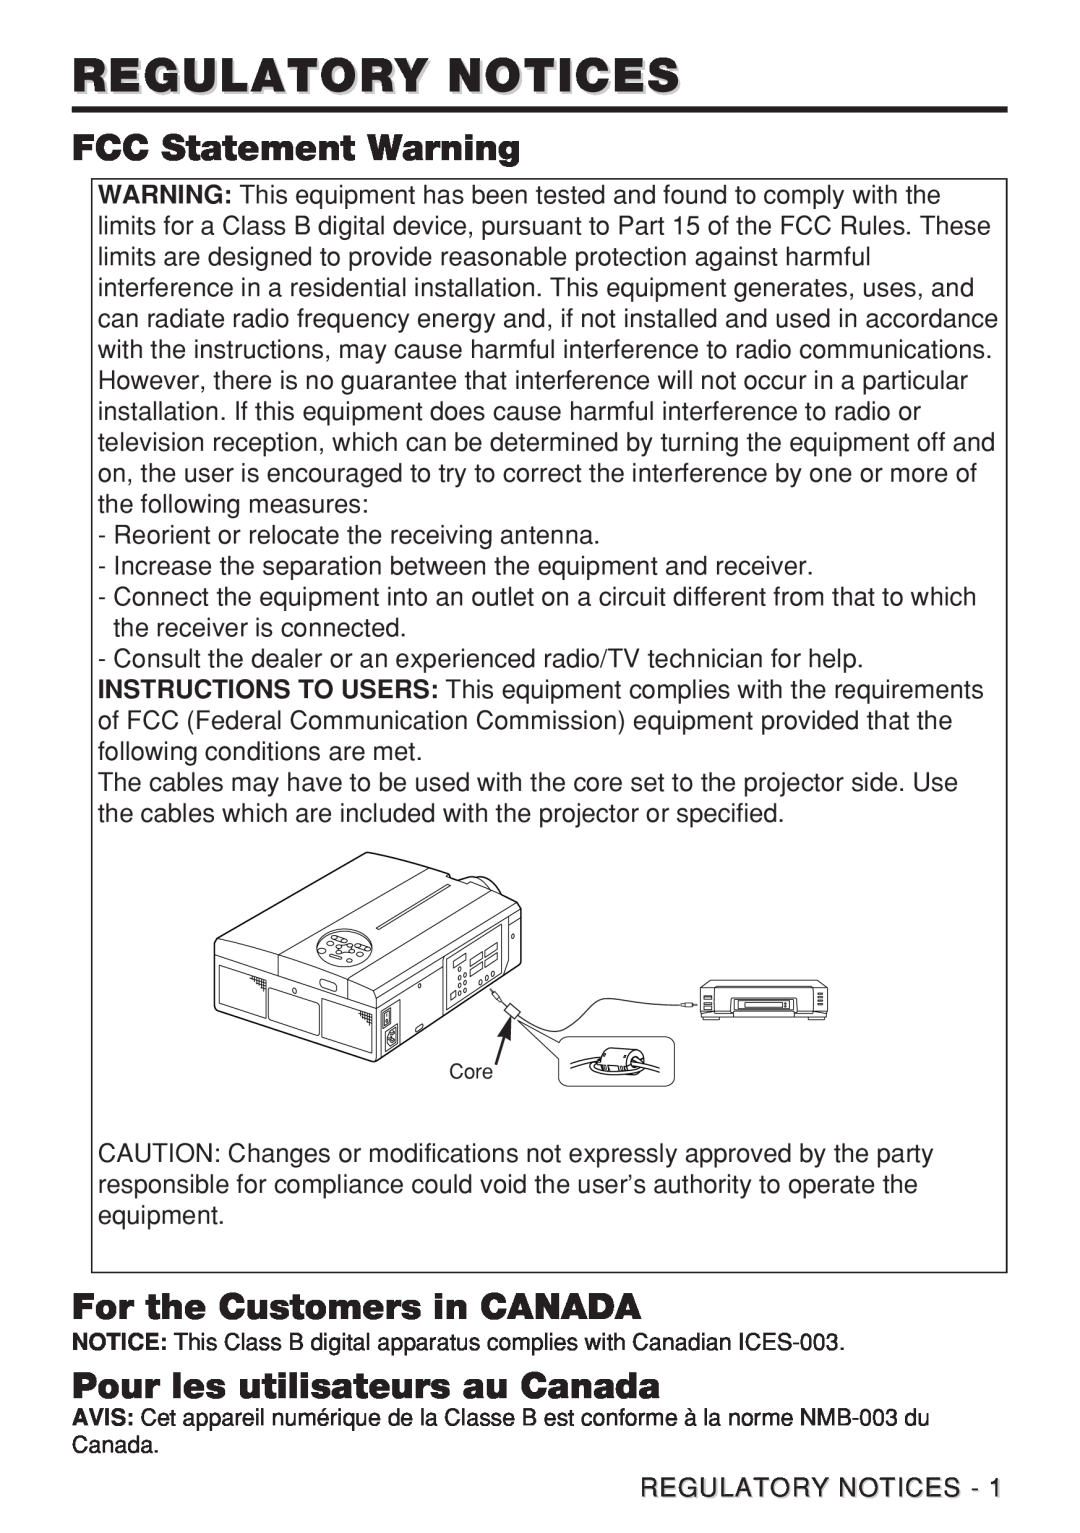 Hitachi CP-X985W Regulatory Notices, FCC Statement Warning, For the Customers in CANADA, Pour les utilisateurs au Canada 